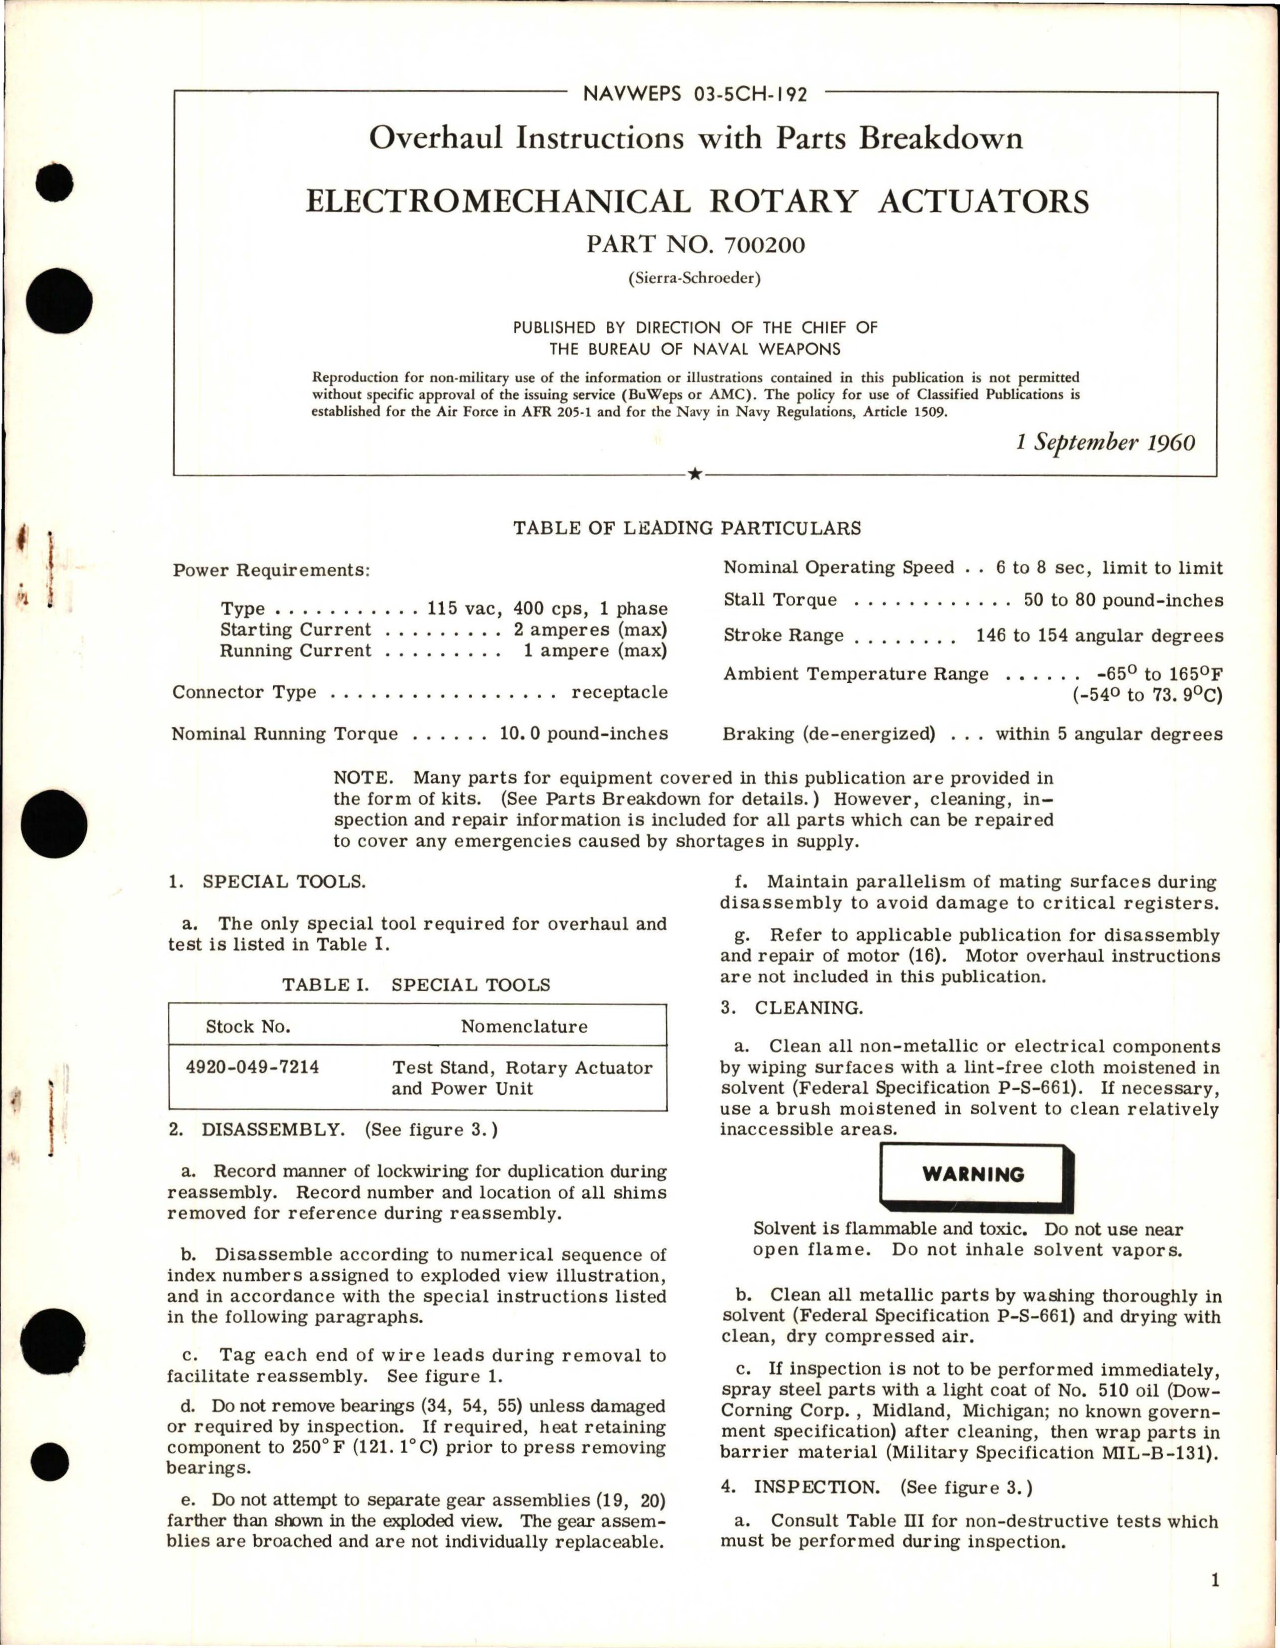 Sample page 1 from AirCorps Library document: Overhaul Instructions with Parts Breakdown for Electromechanical Rotary Actuators - Part 700200